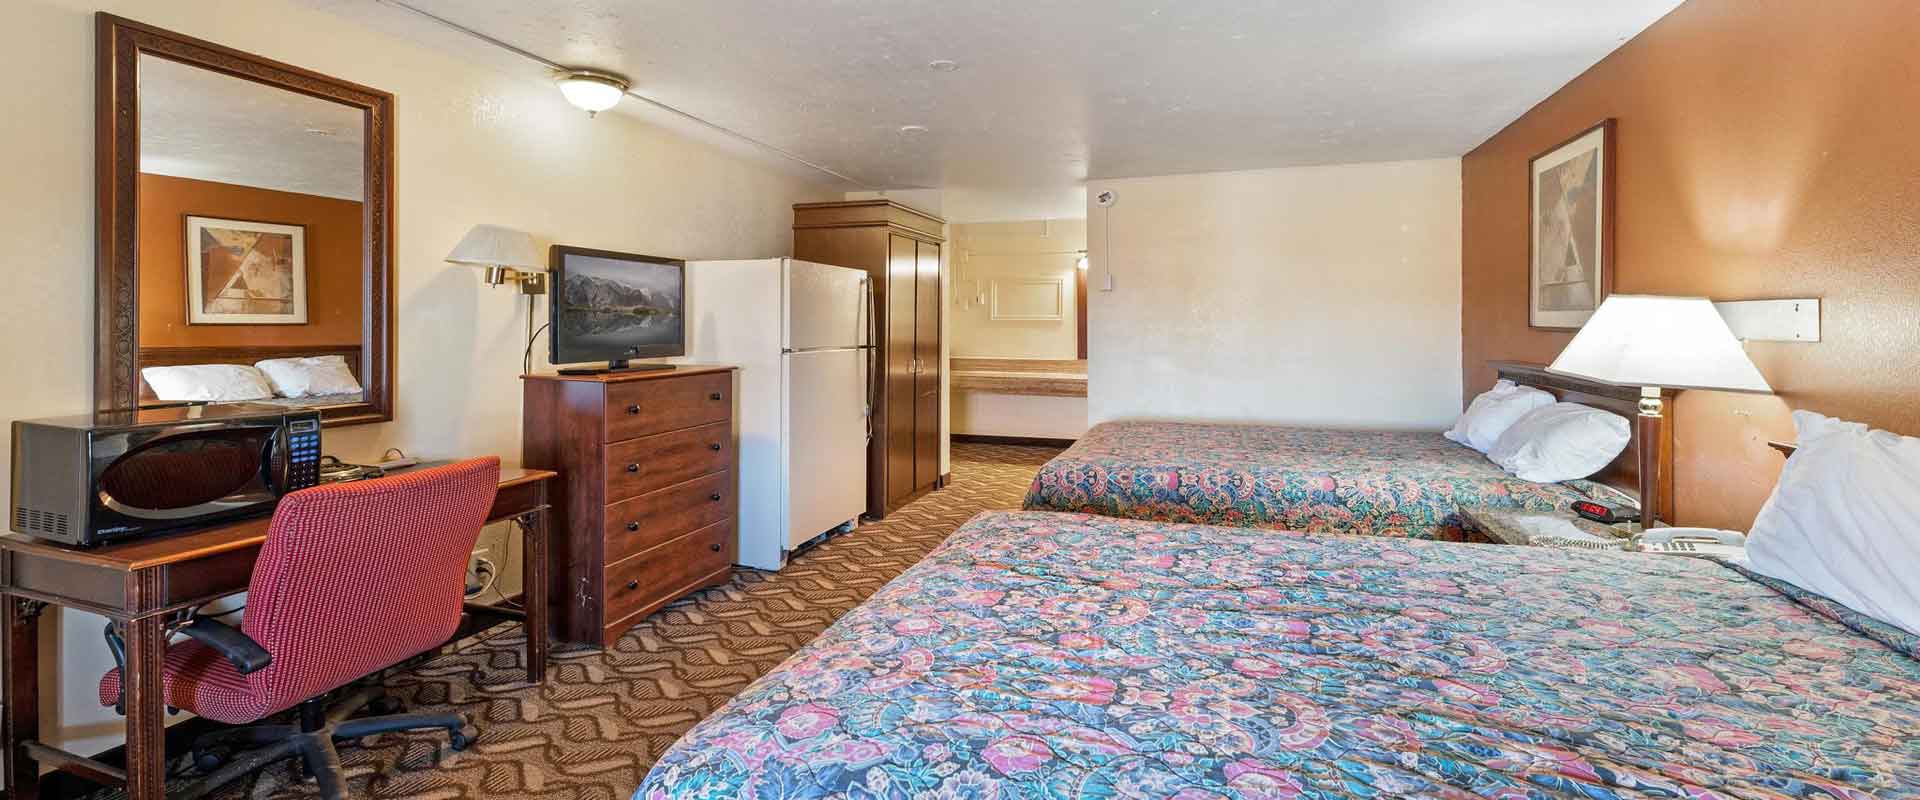 Anglers Inn Best Value | Vernal Newly Remodeled Hotels Motels in